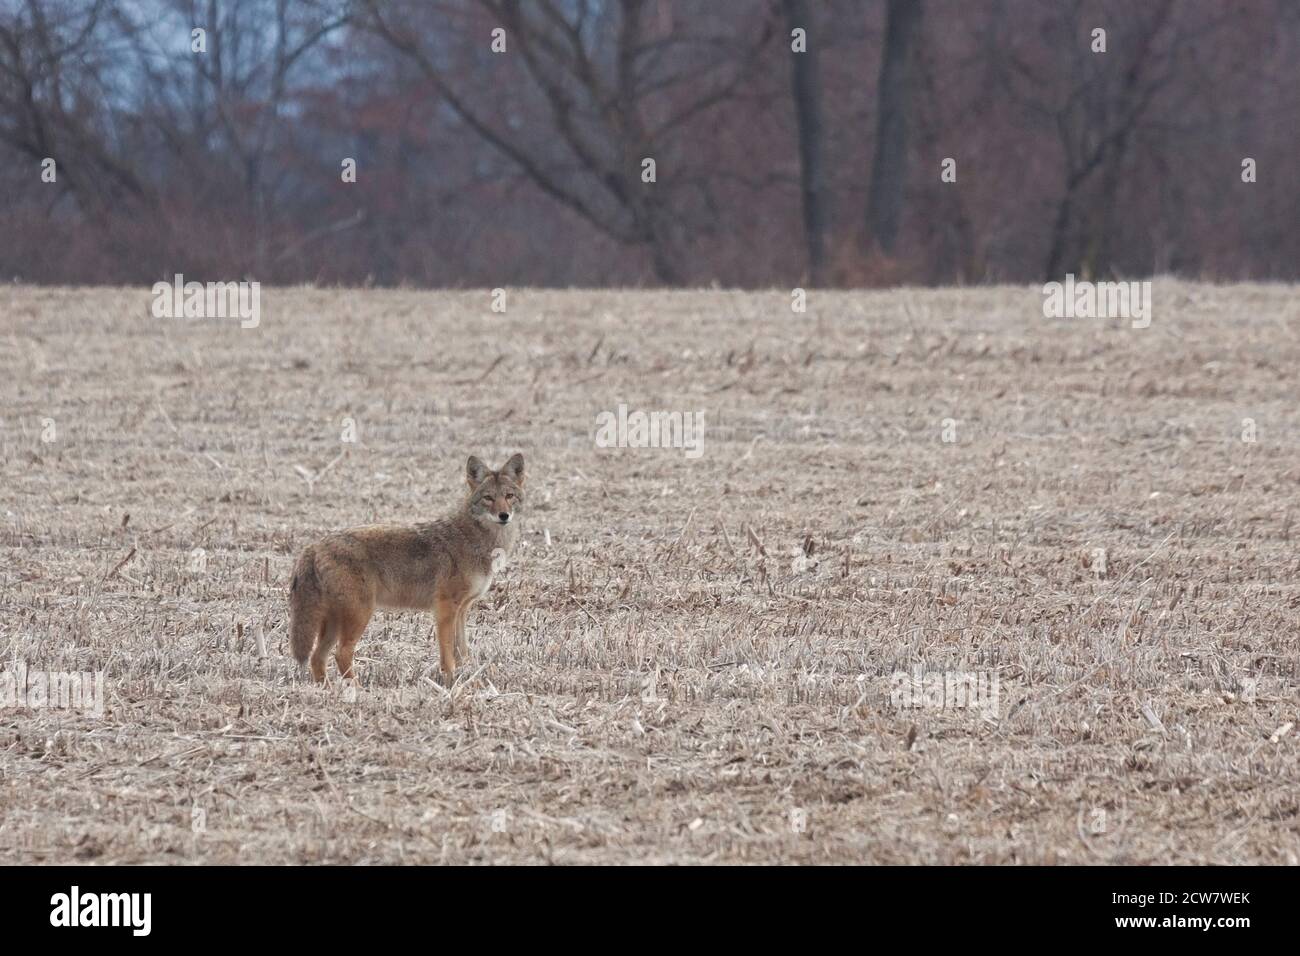 A solitary coyote stands in a recently plowed corn field before it trots of into the distant hedge row. Stock Photo